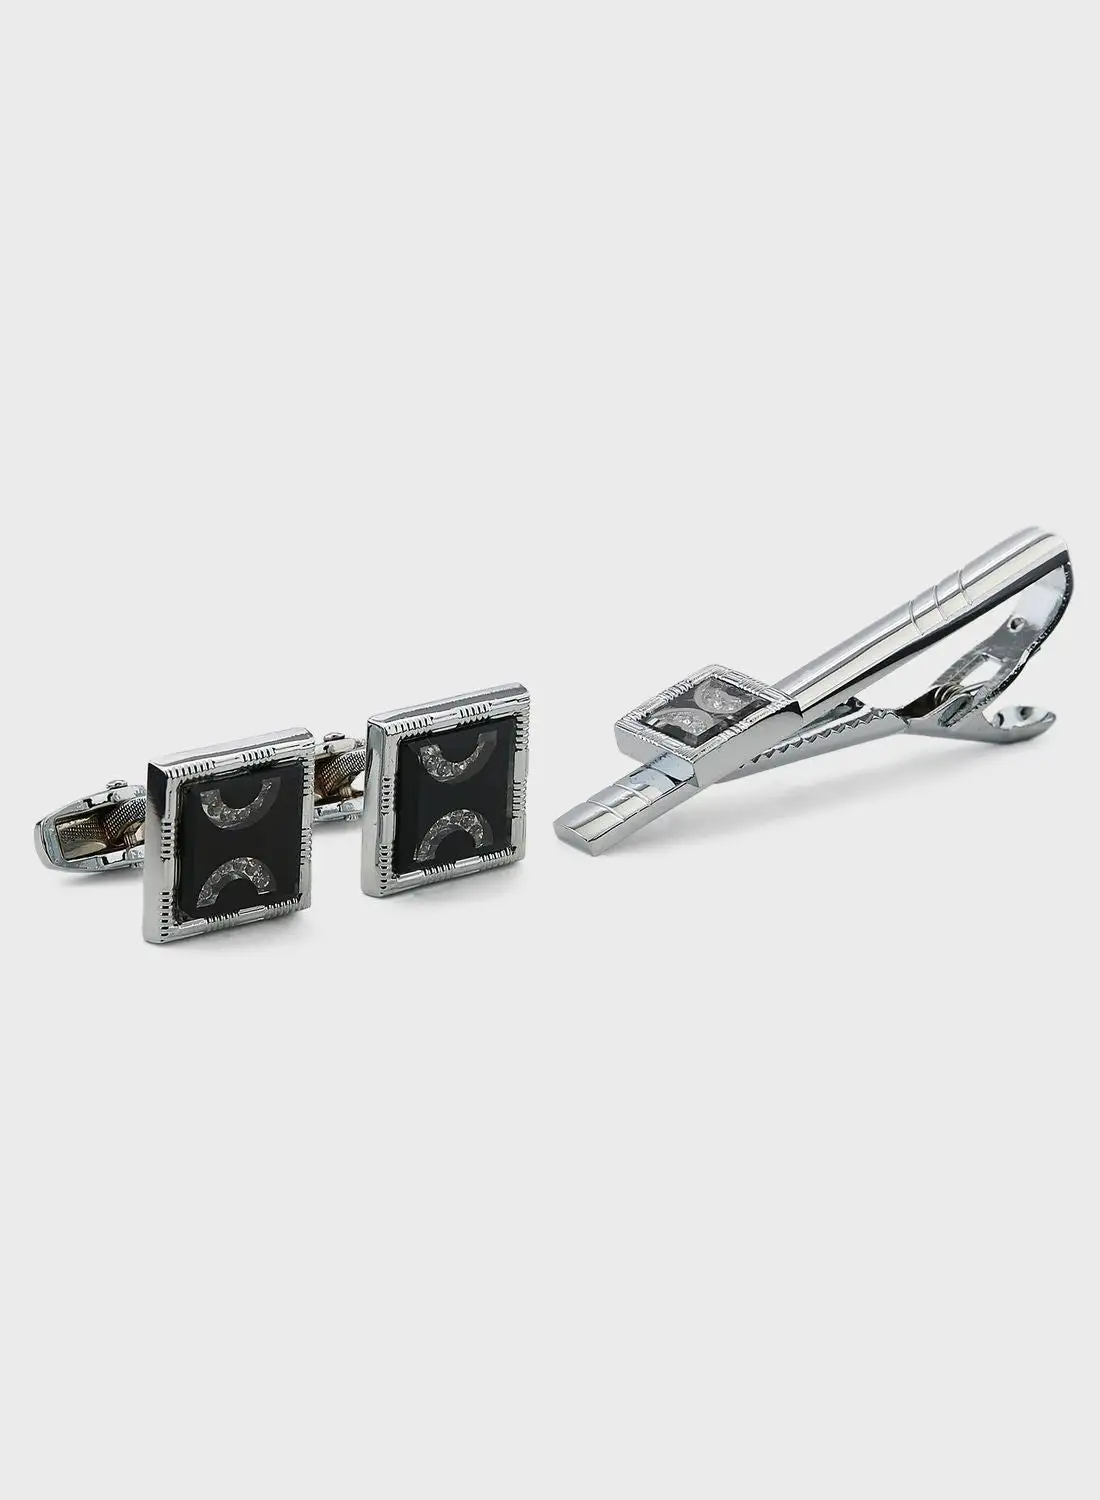 Robert Wood Cufflink And Tie Pin Set In Gift Box